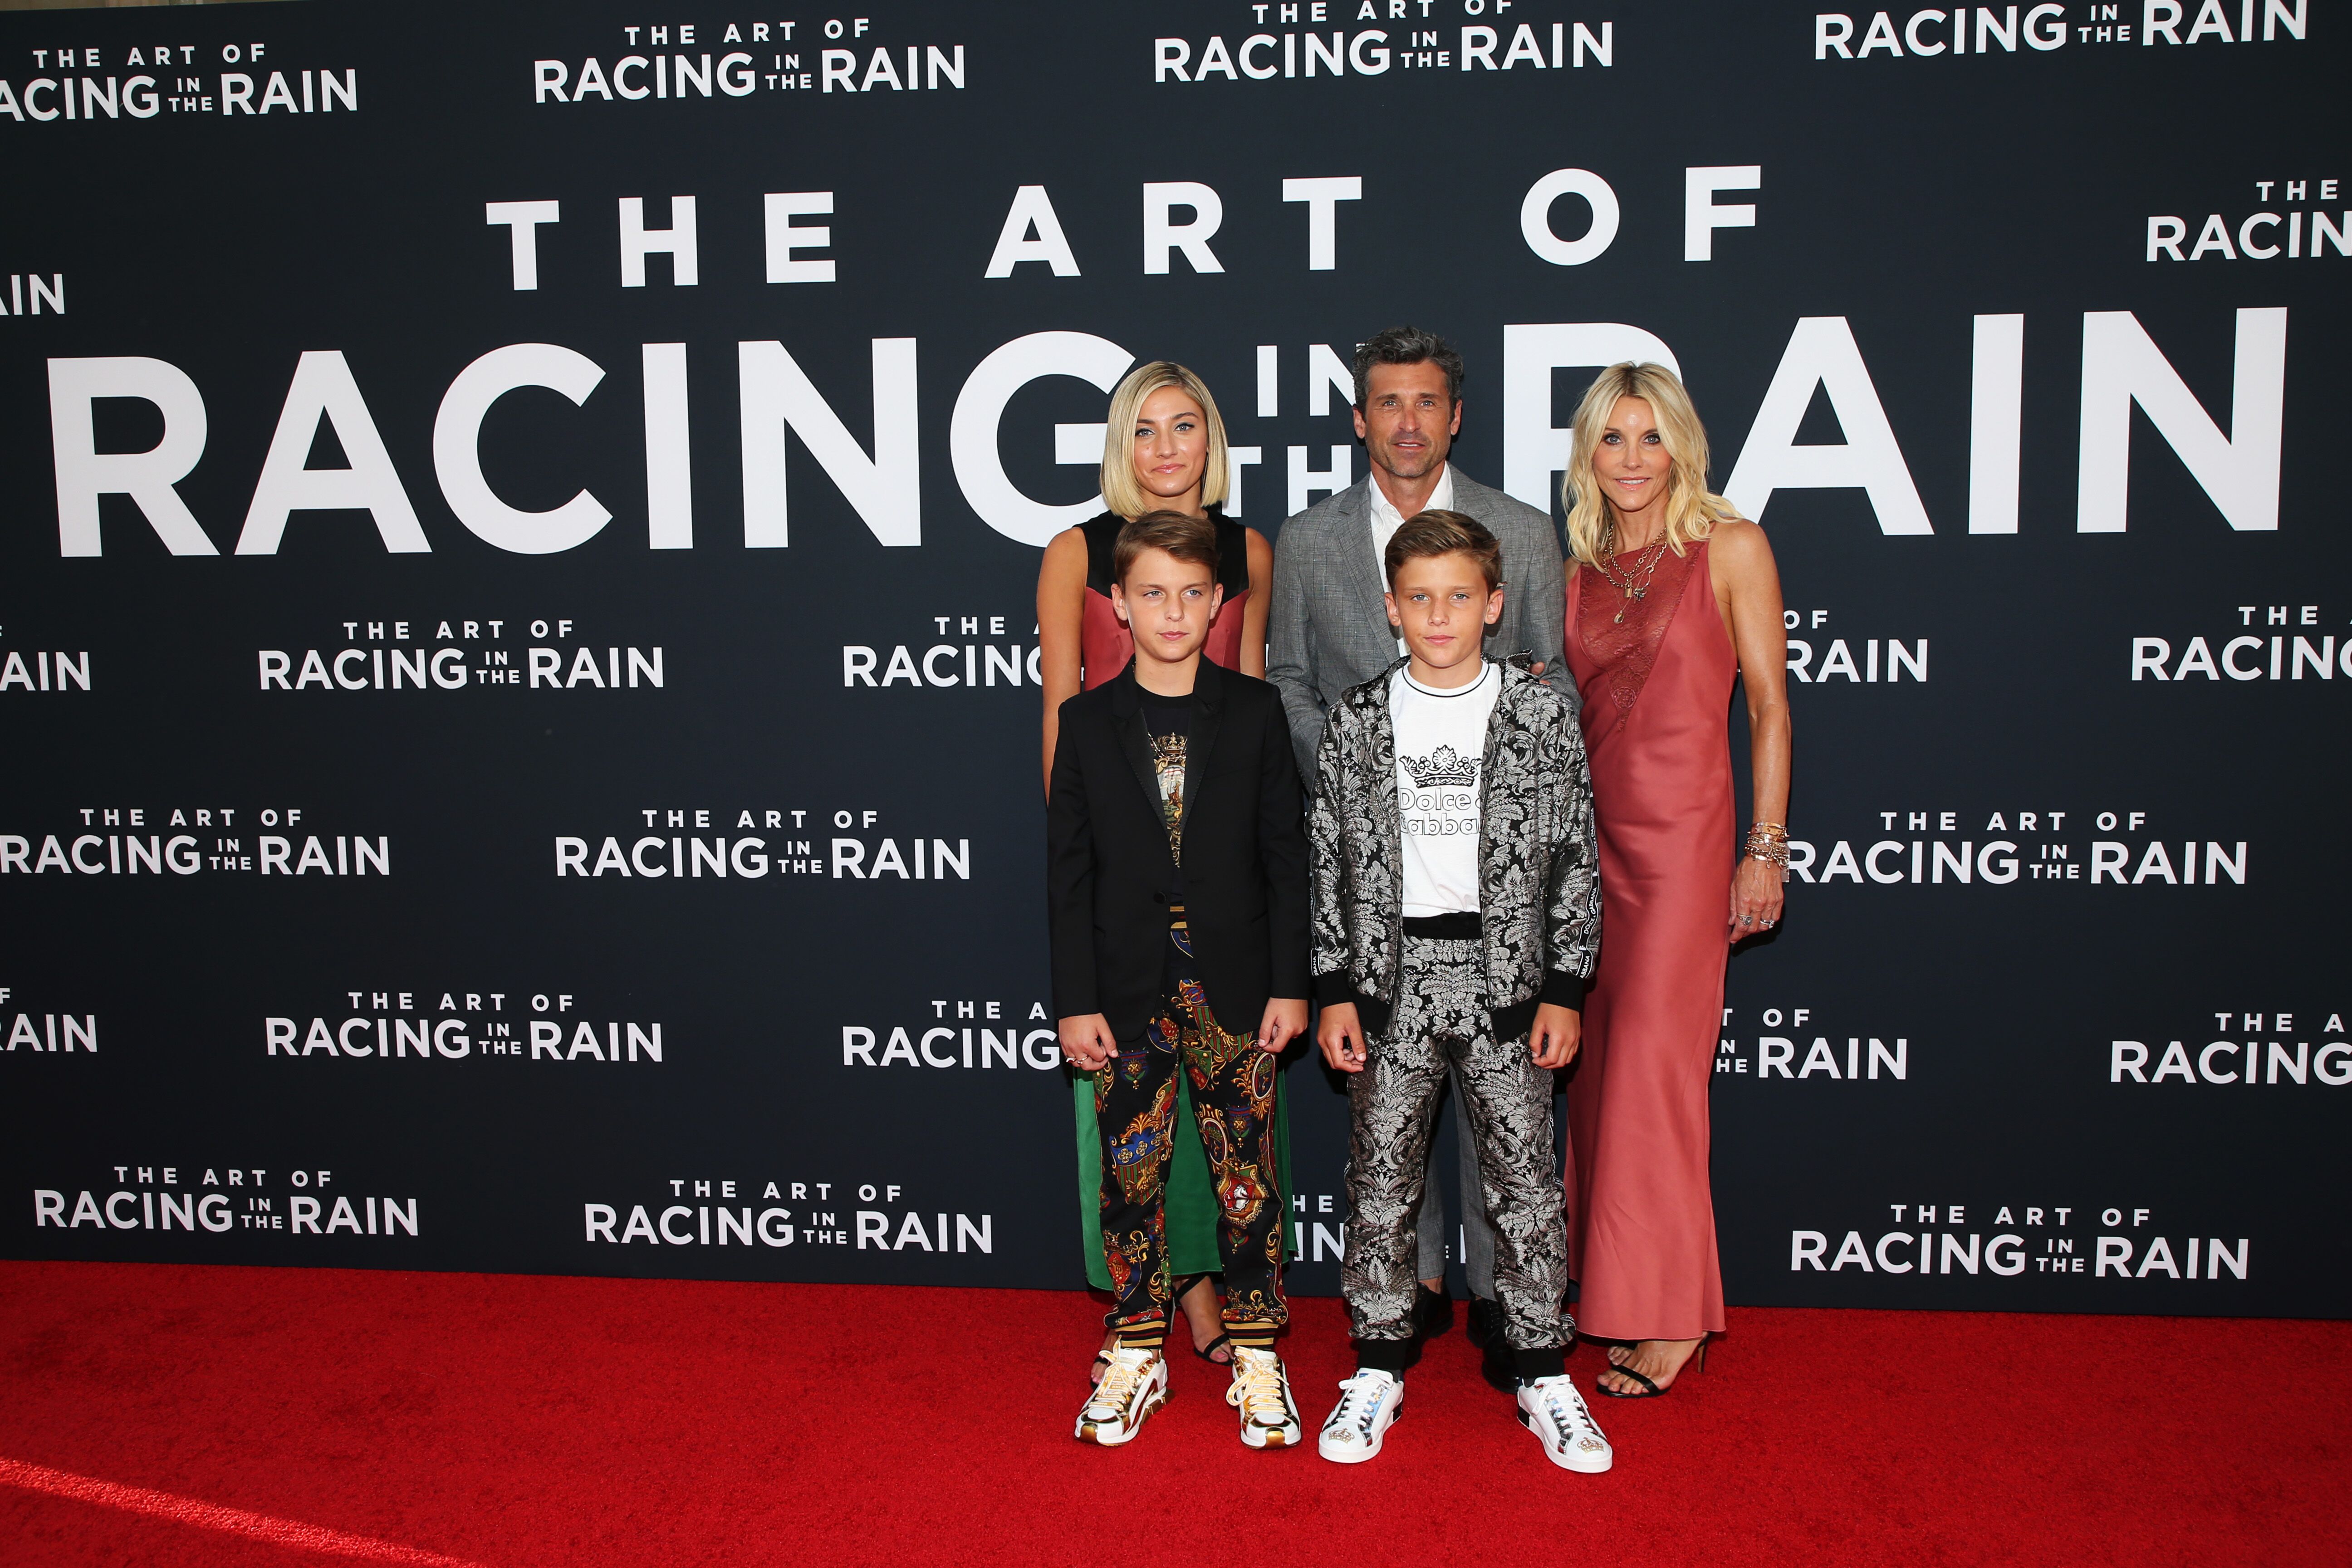 Patrick Dempsey and his wife and children at the ARTR premiere/ Source: Getty Images